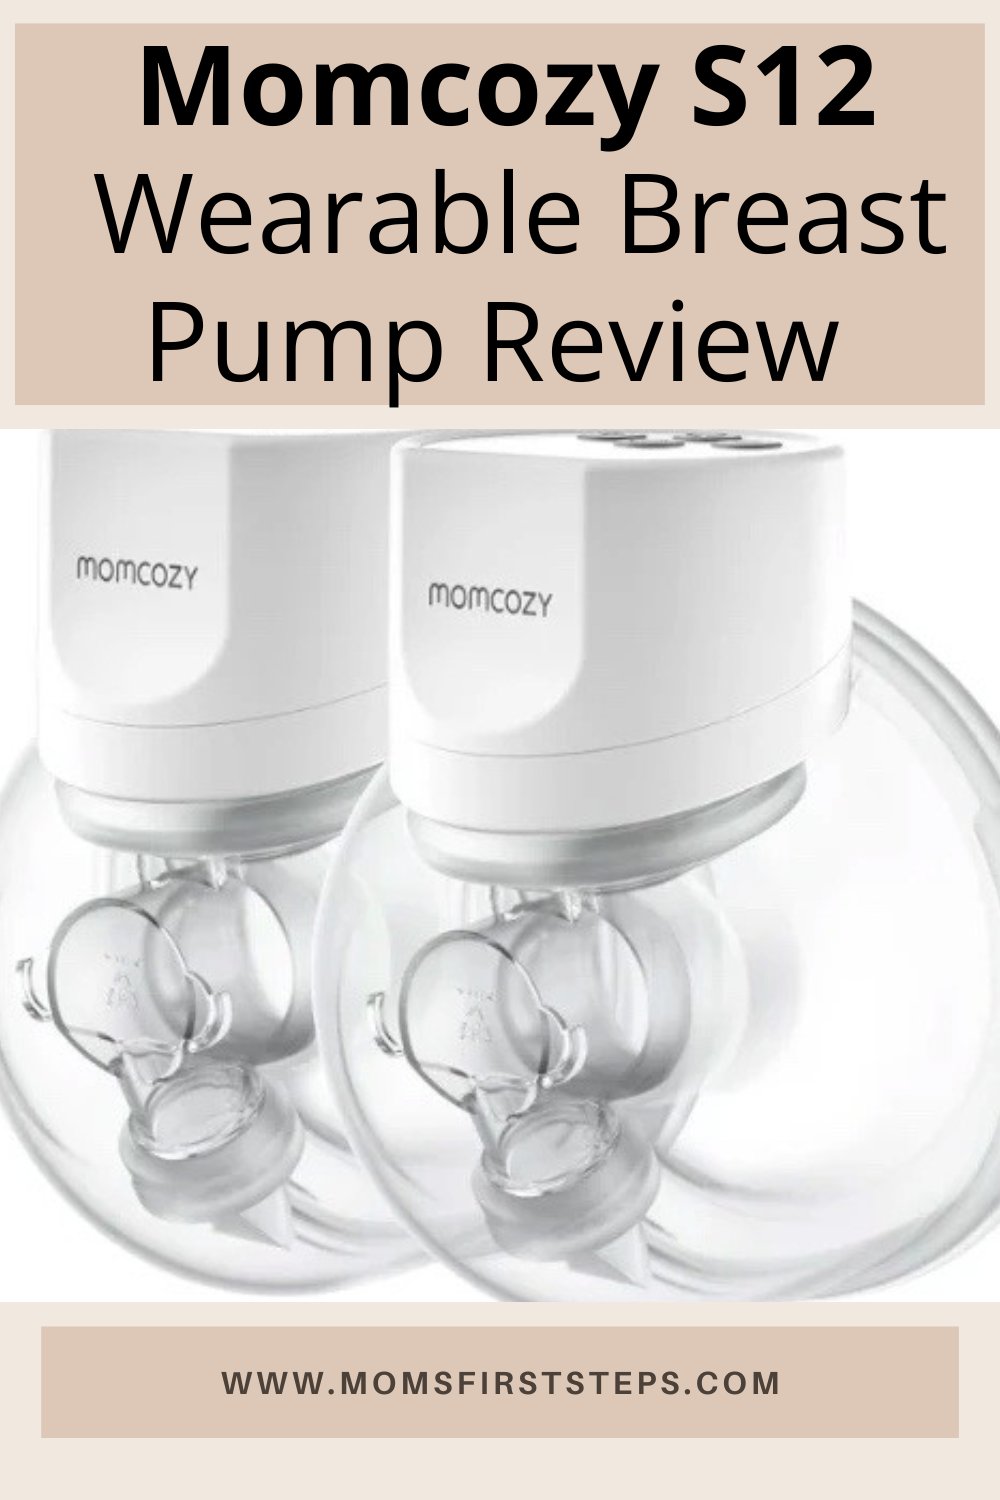 momcozy s12 pro breast pump review — Mom's First Steps